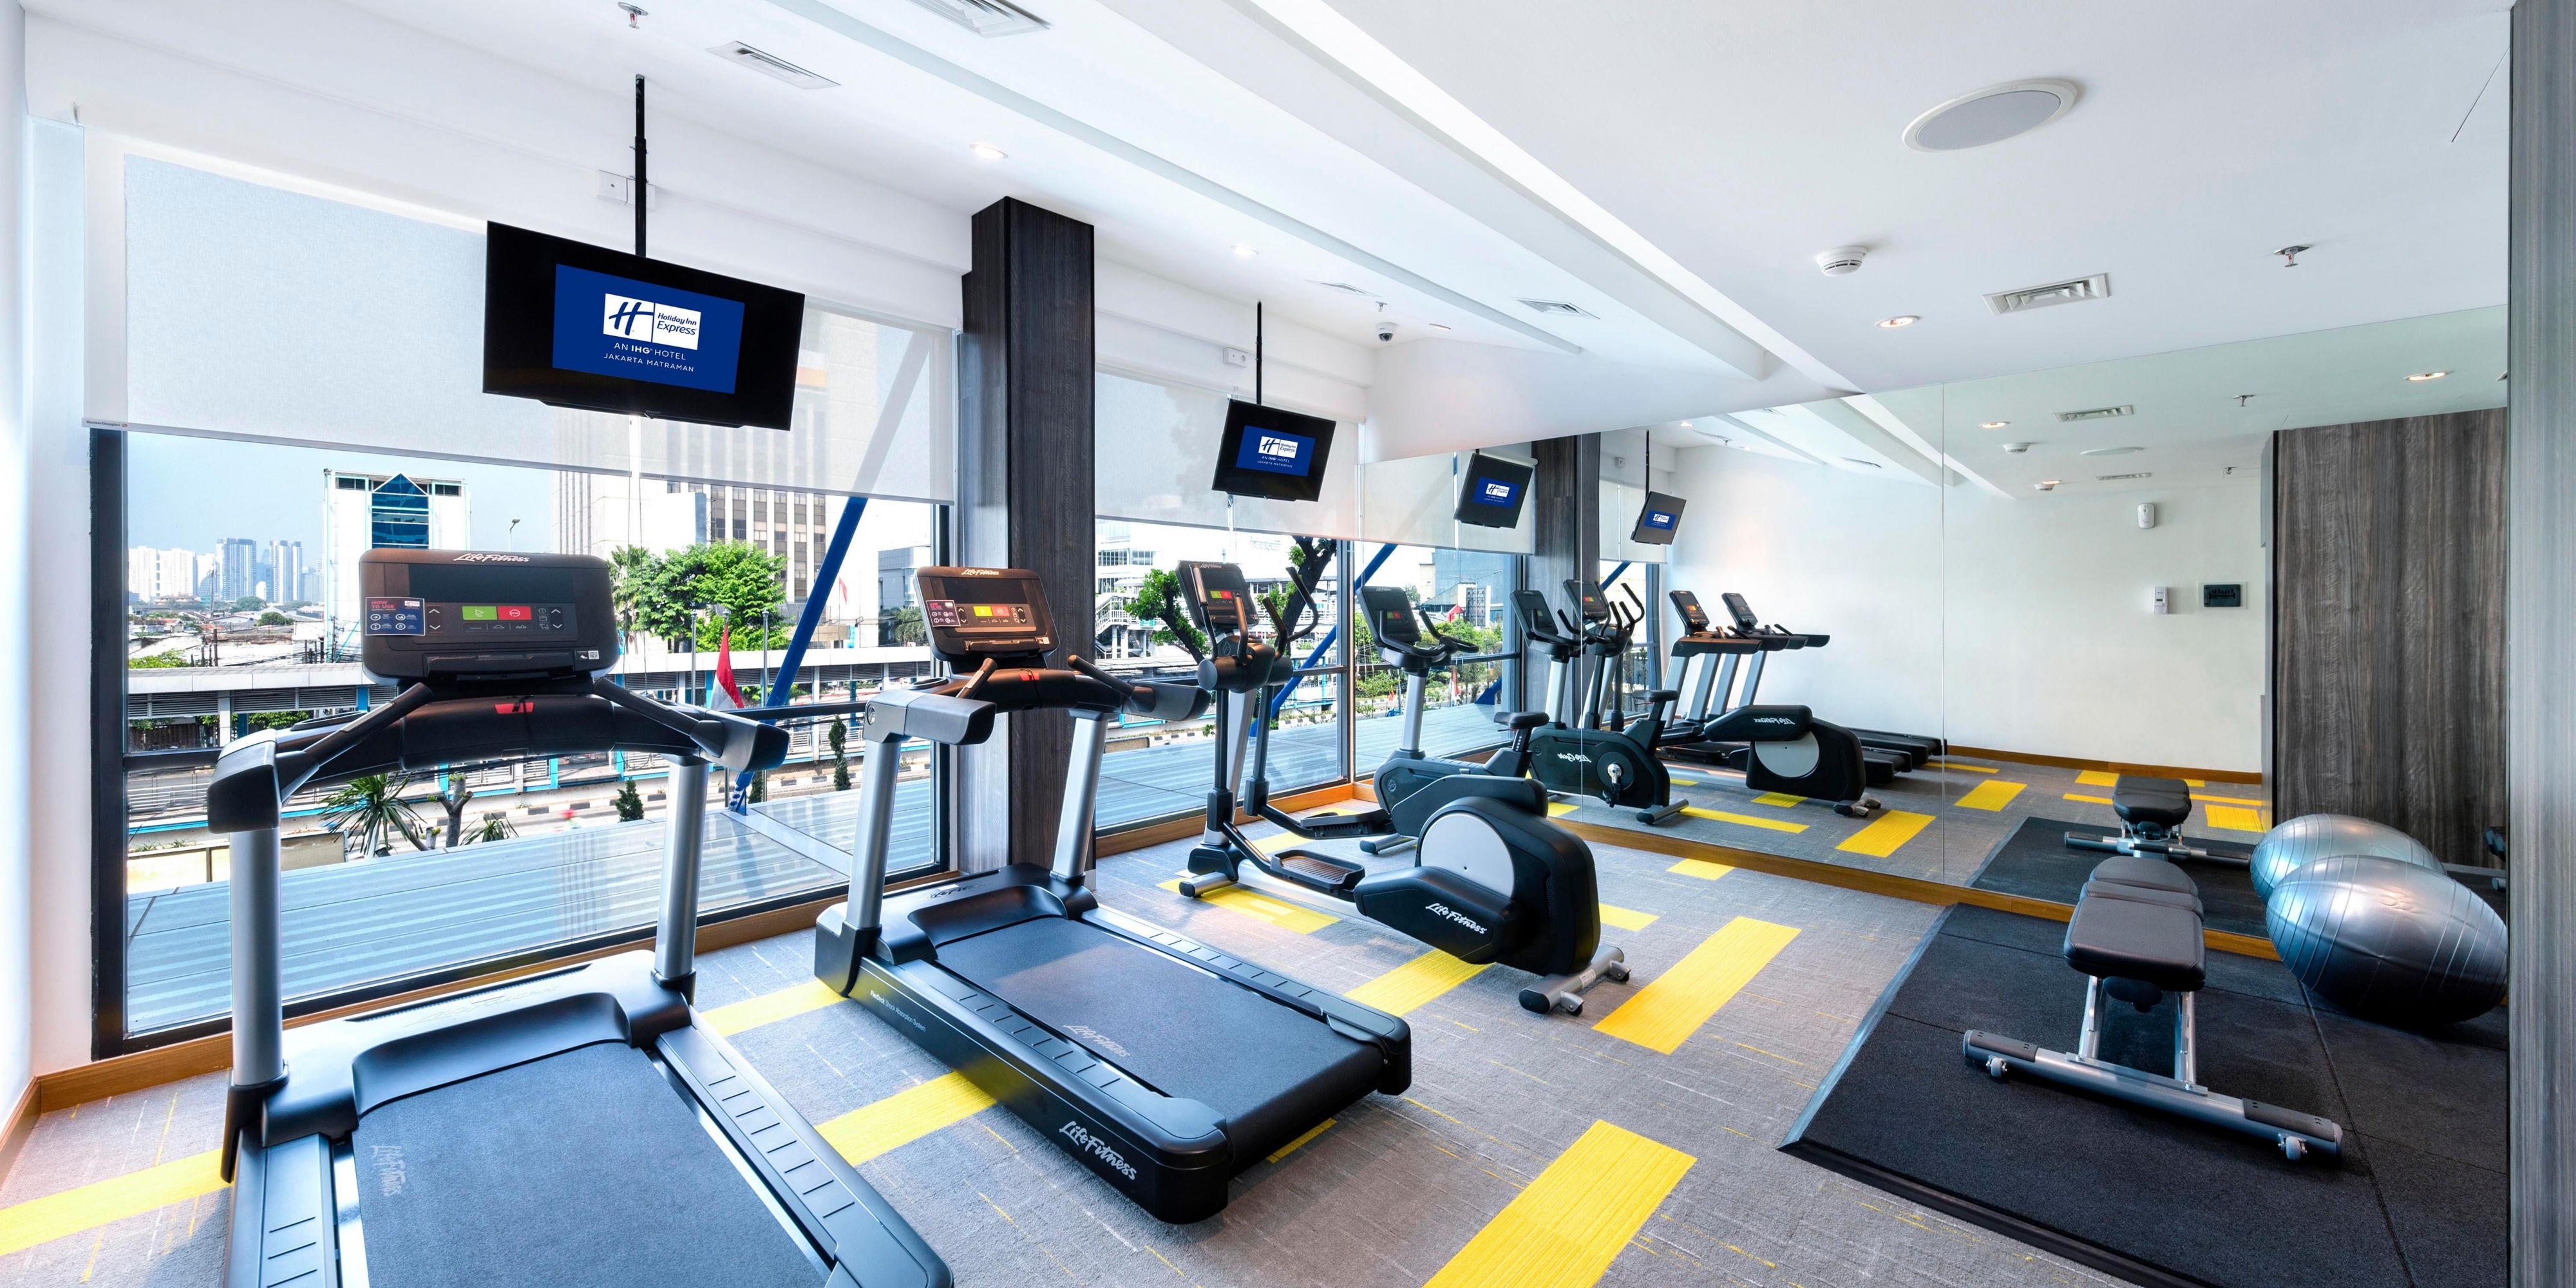 Keep your body fit during your tight schedule in our gym. We have all the equipment to support your needs.